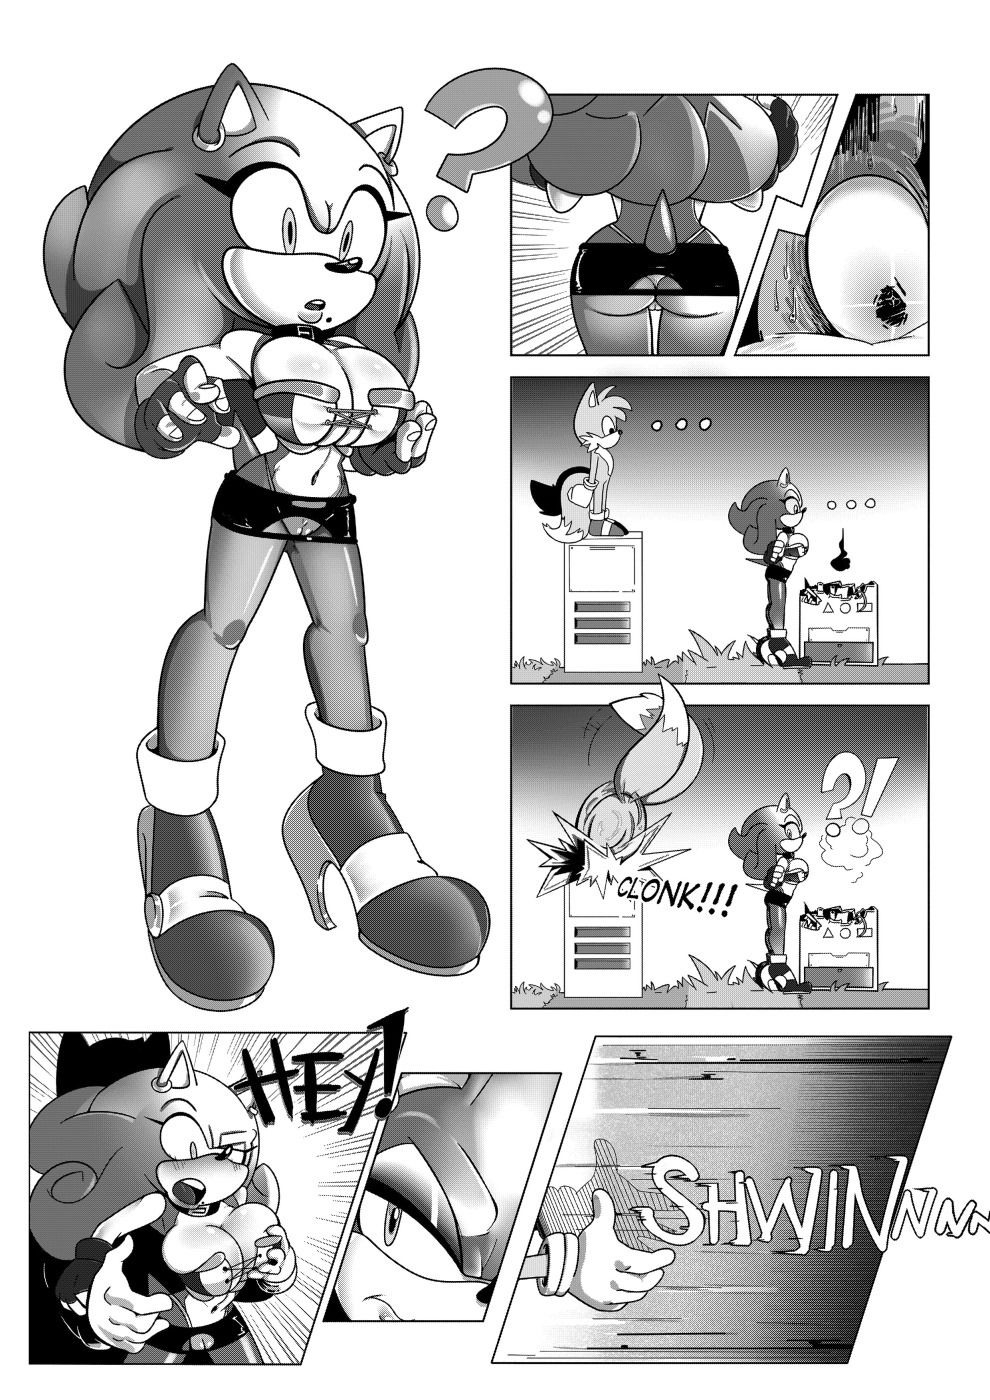 Unbreakable Bond page 5